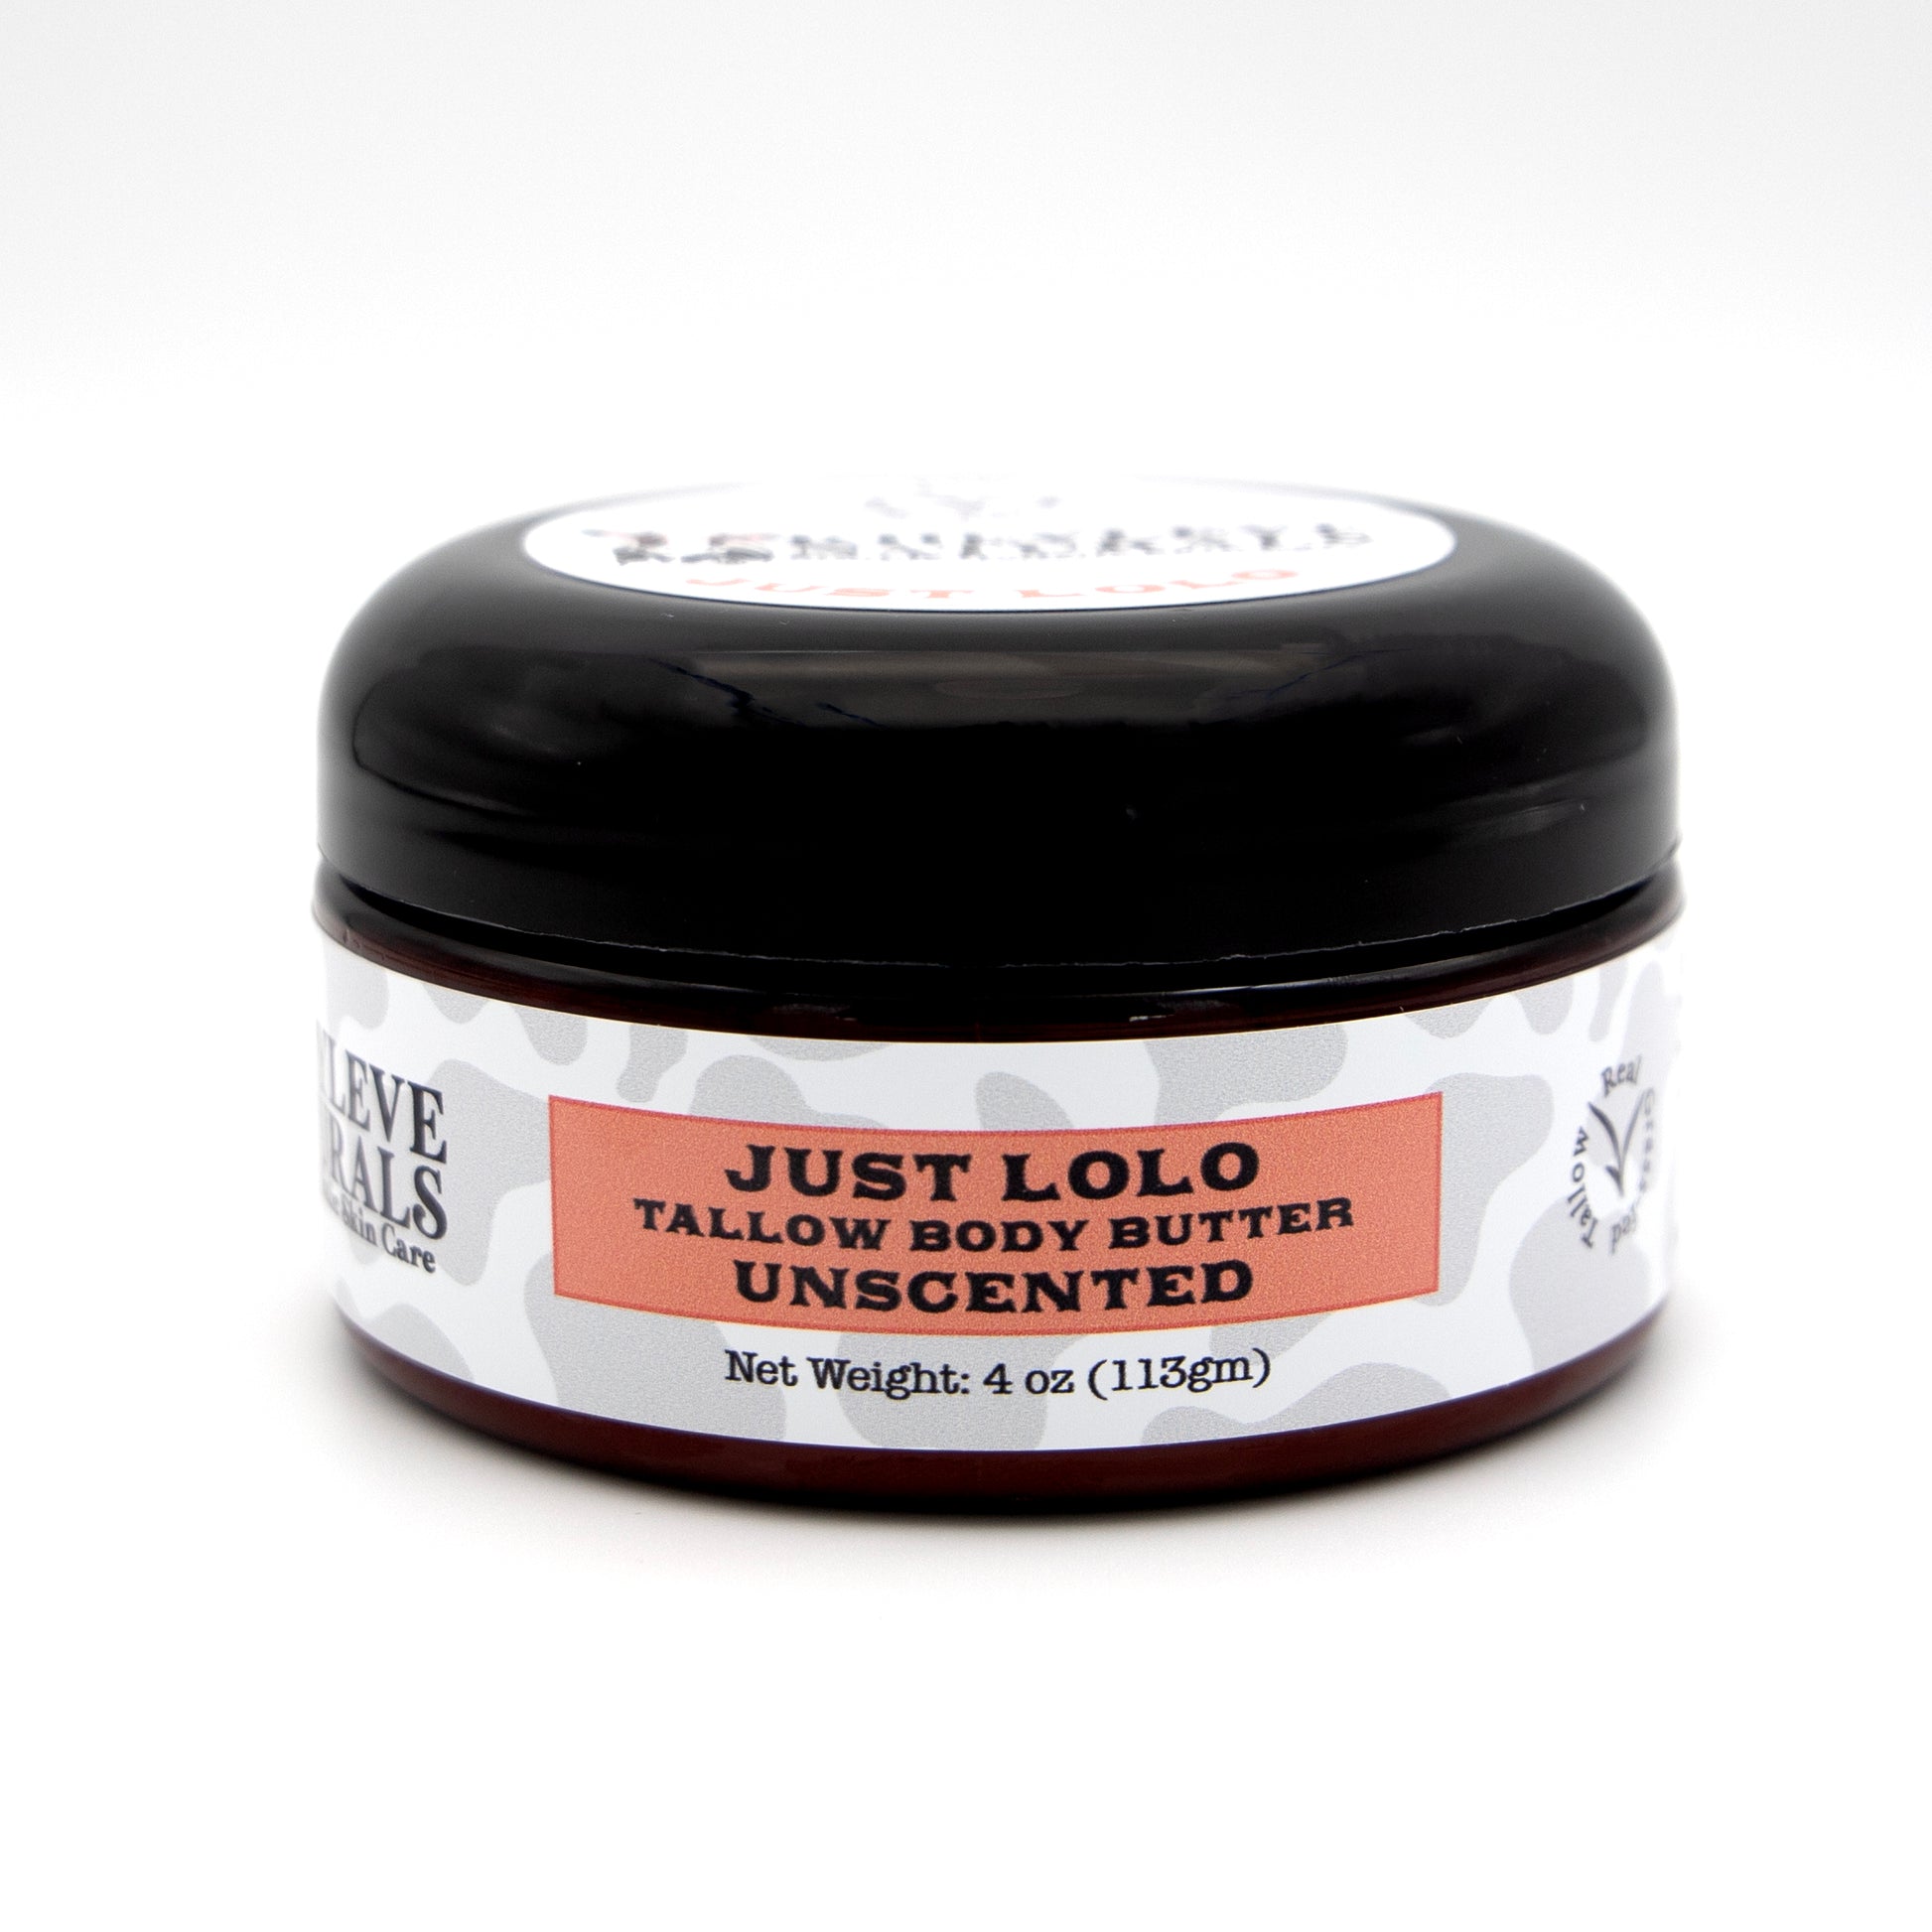 Just Lolo is the best body butter for your EVERYONE and especially for those who have sensitive skin, and little ones.